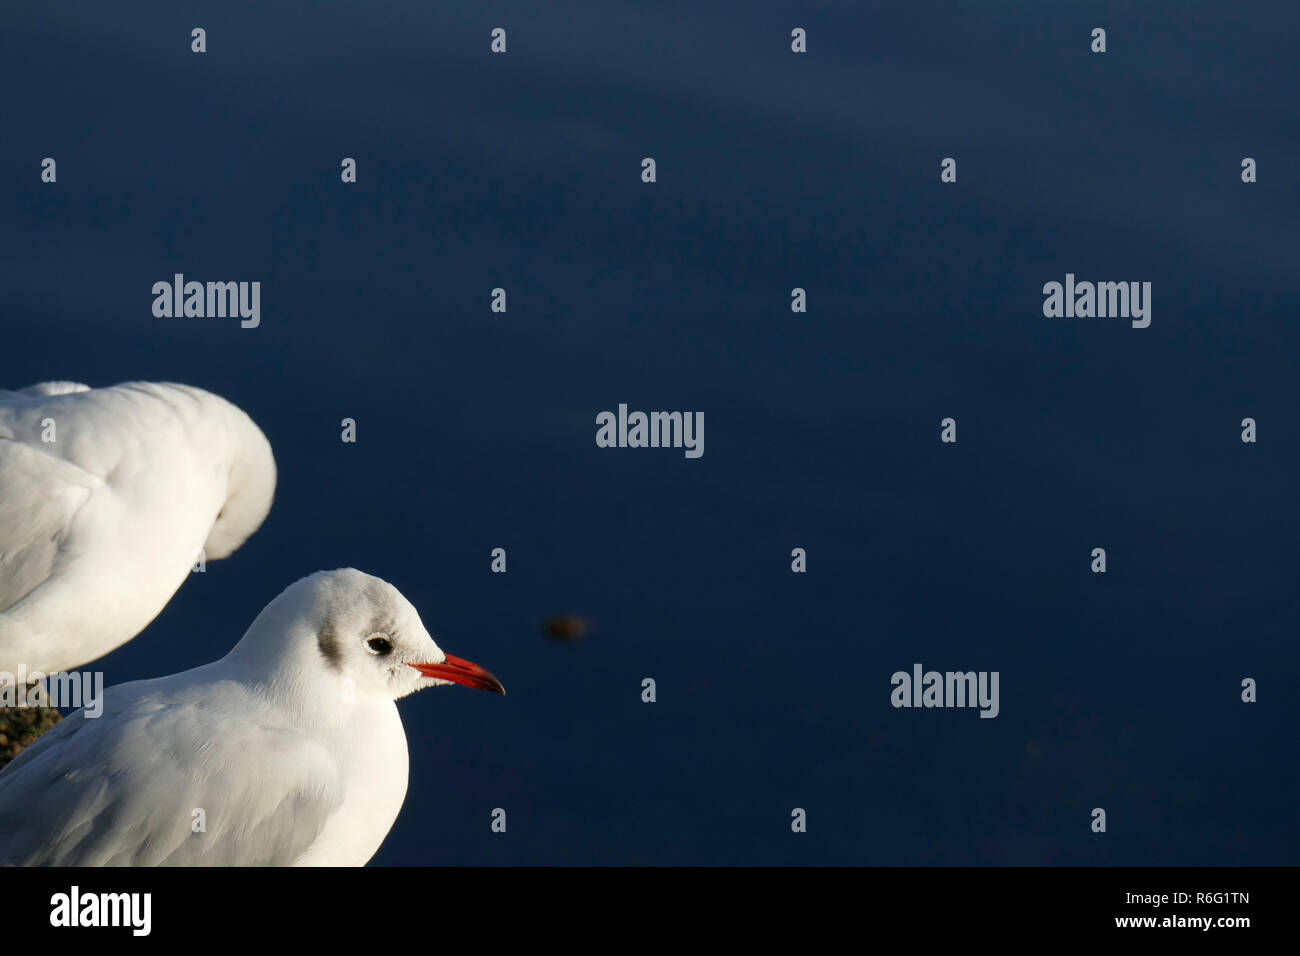 White seagulls on a blue water surface, Germany, Europe Stock Photo